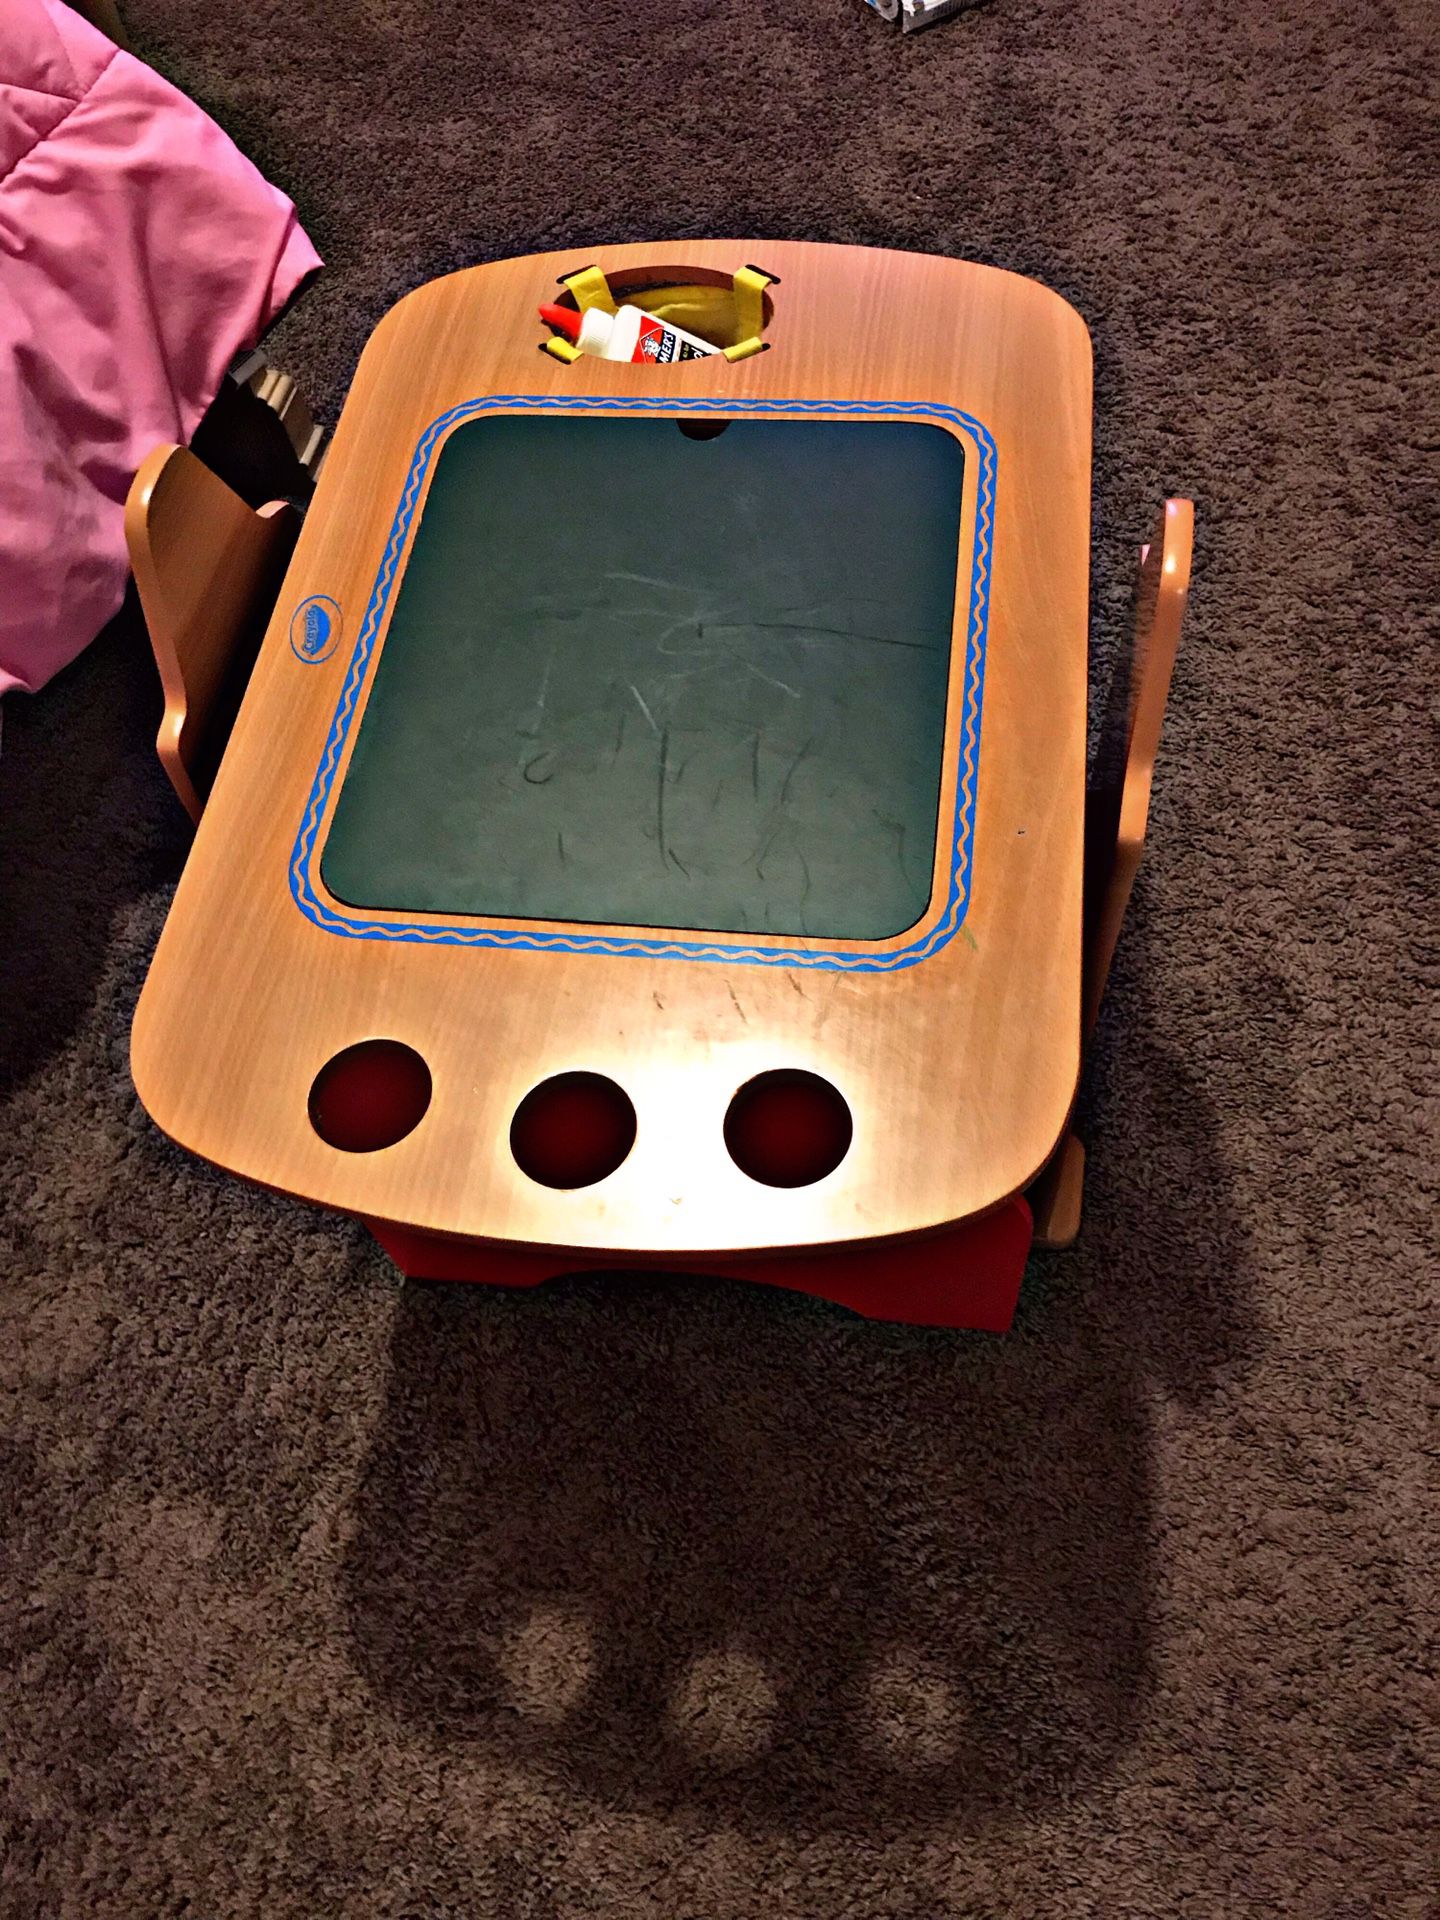 Crayola Kids Desk - Significantly dropped price to make room